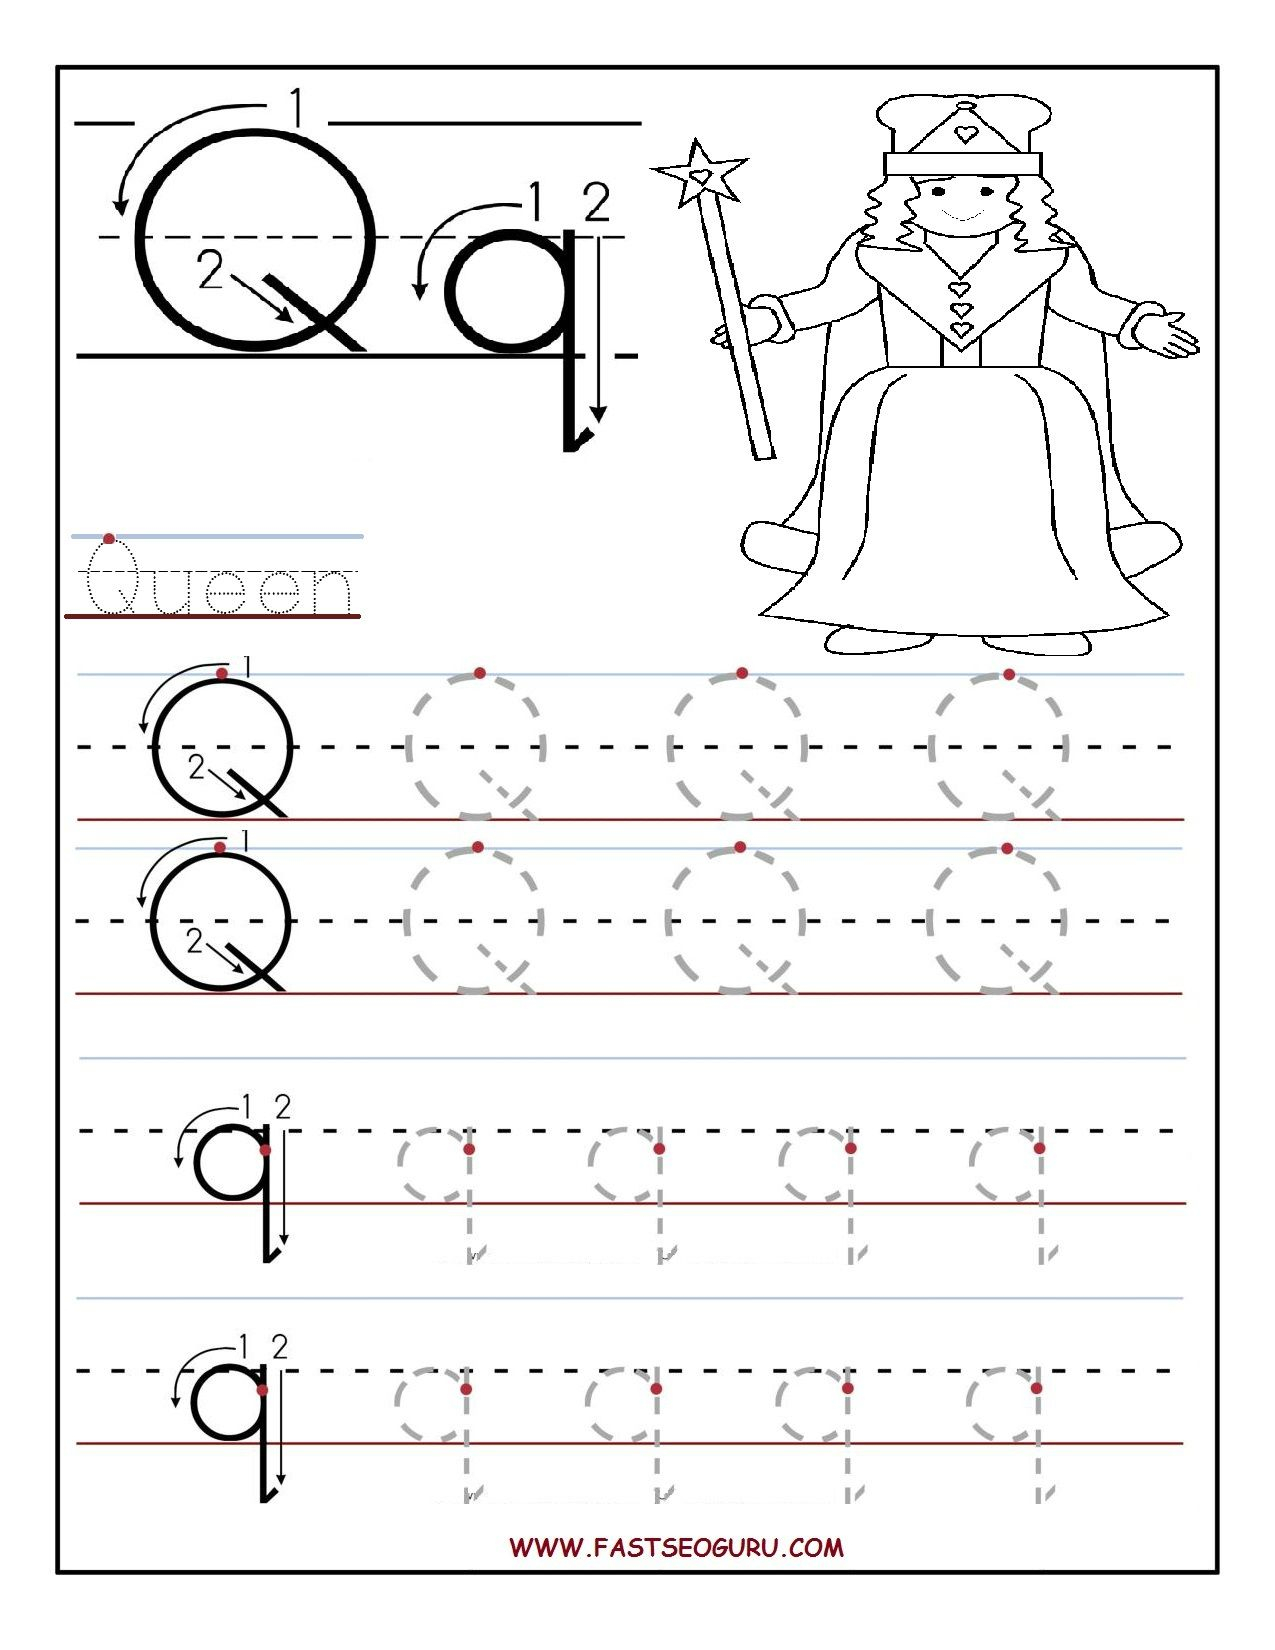 Printable Letter Q Tracing Worksheets For Preschool with regard to Letter Tracing Q